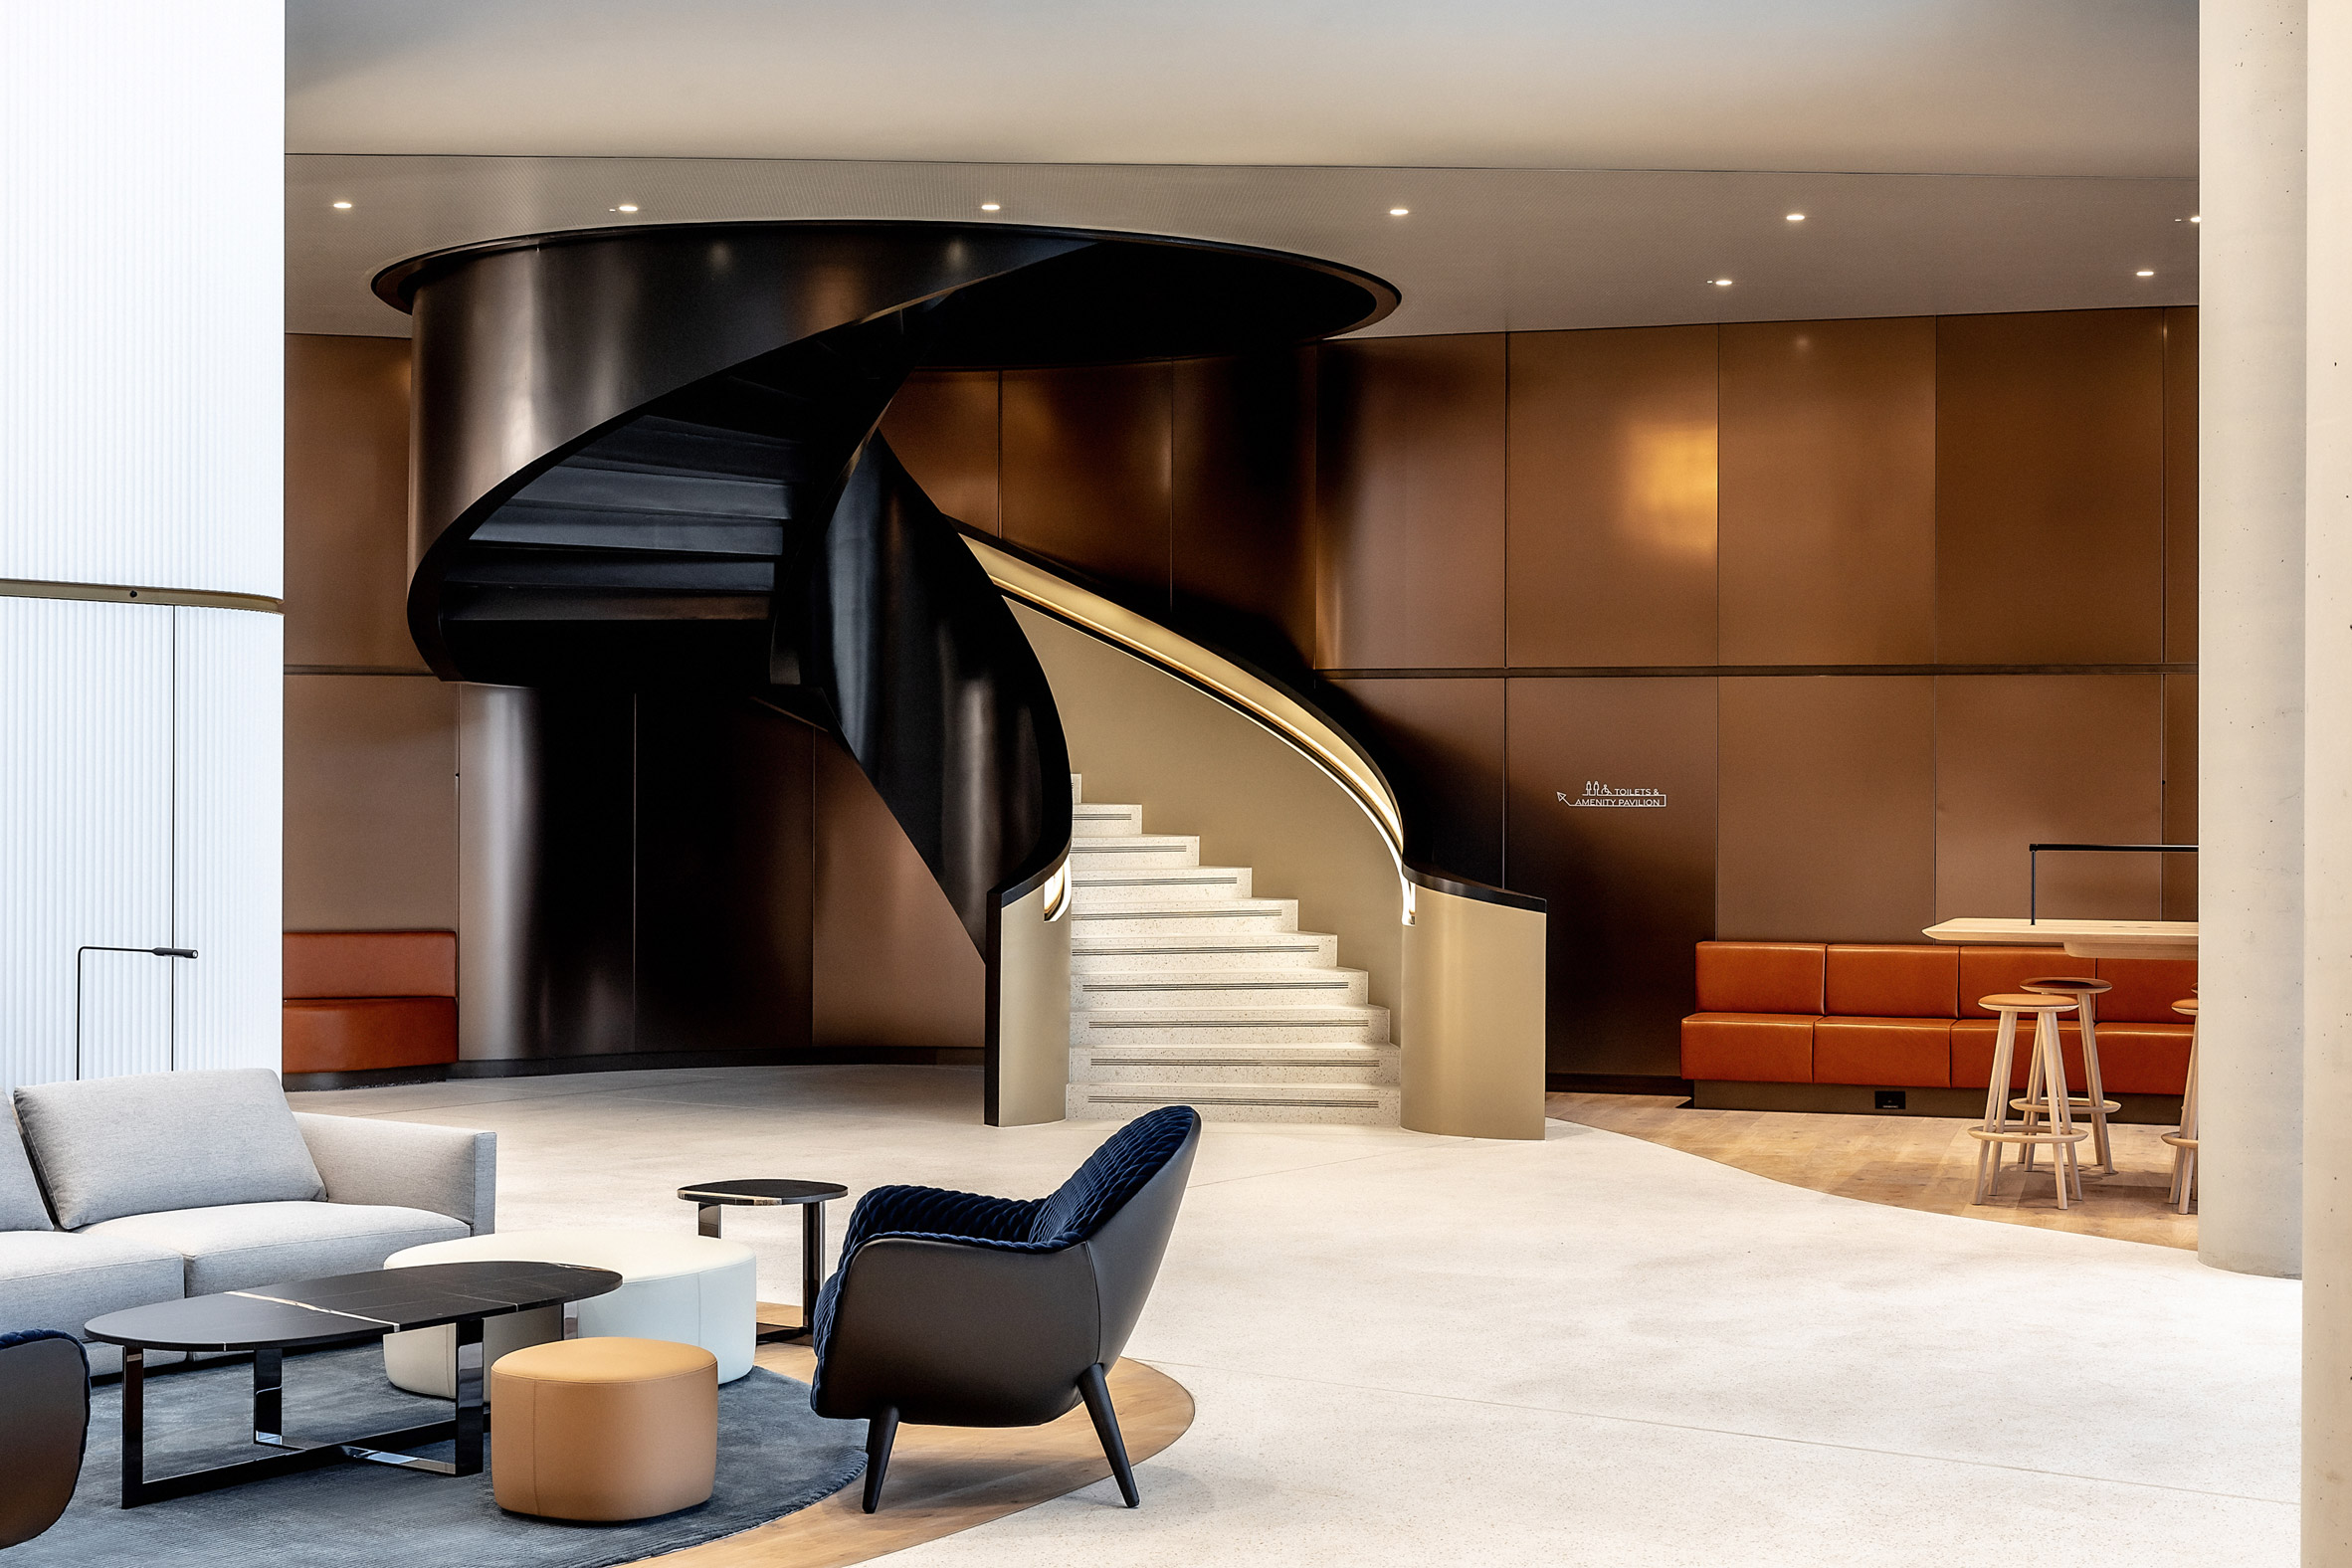 Warm interiors of 50 Electric Boulevard by Foster + Partners